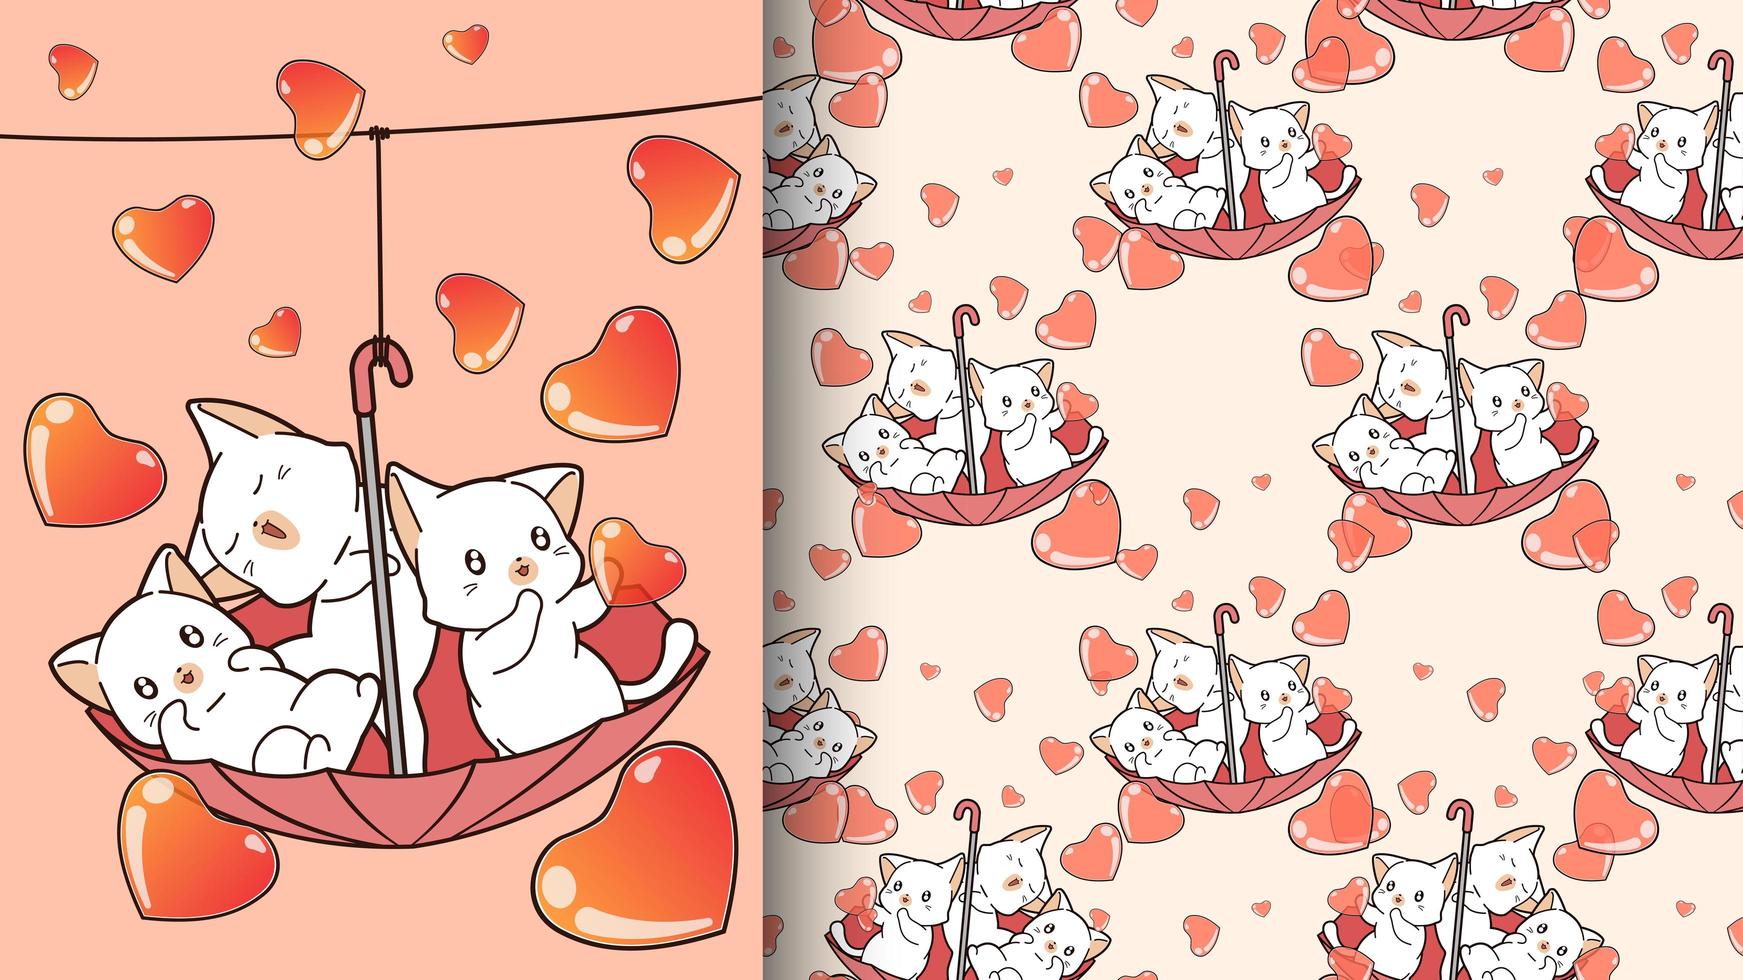 Adorable cats inside red umbrella with hearts pattern vector